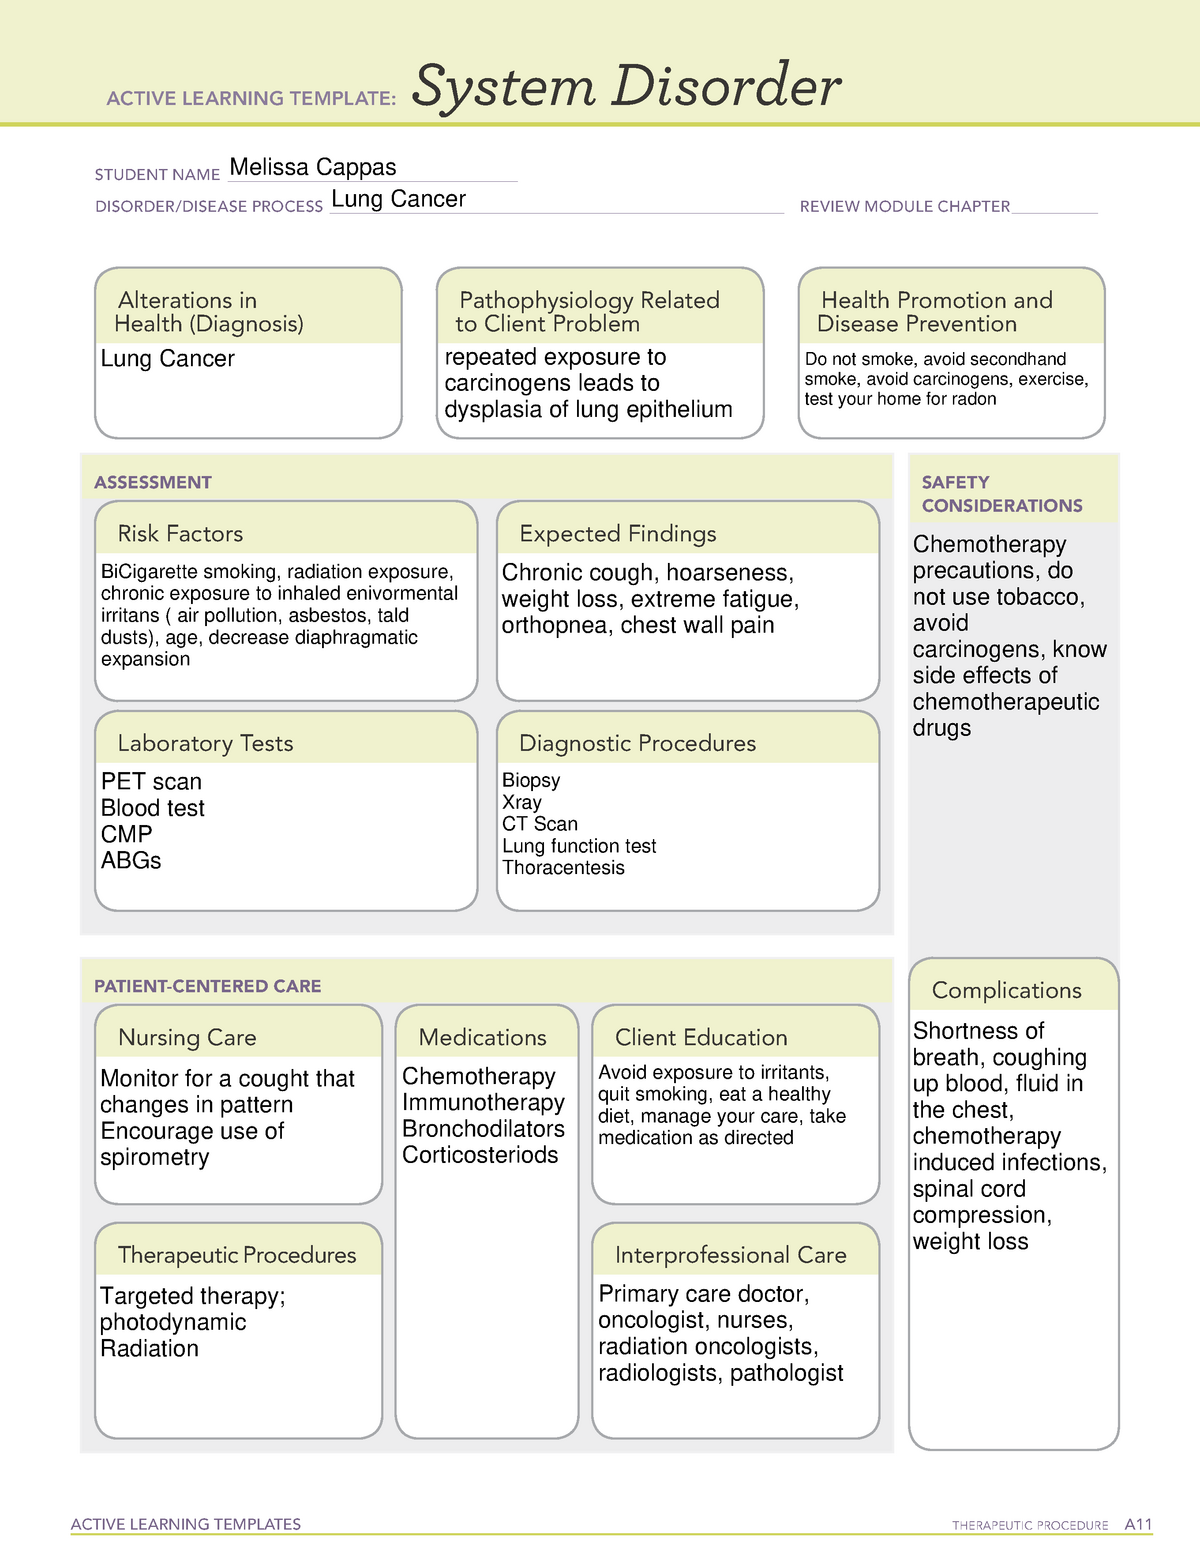 Lung cancer system disorder ati template ACTIVE LEARNING TEMPLATES